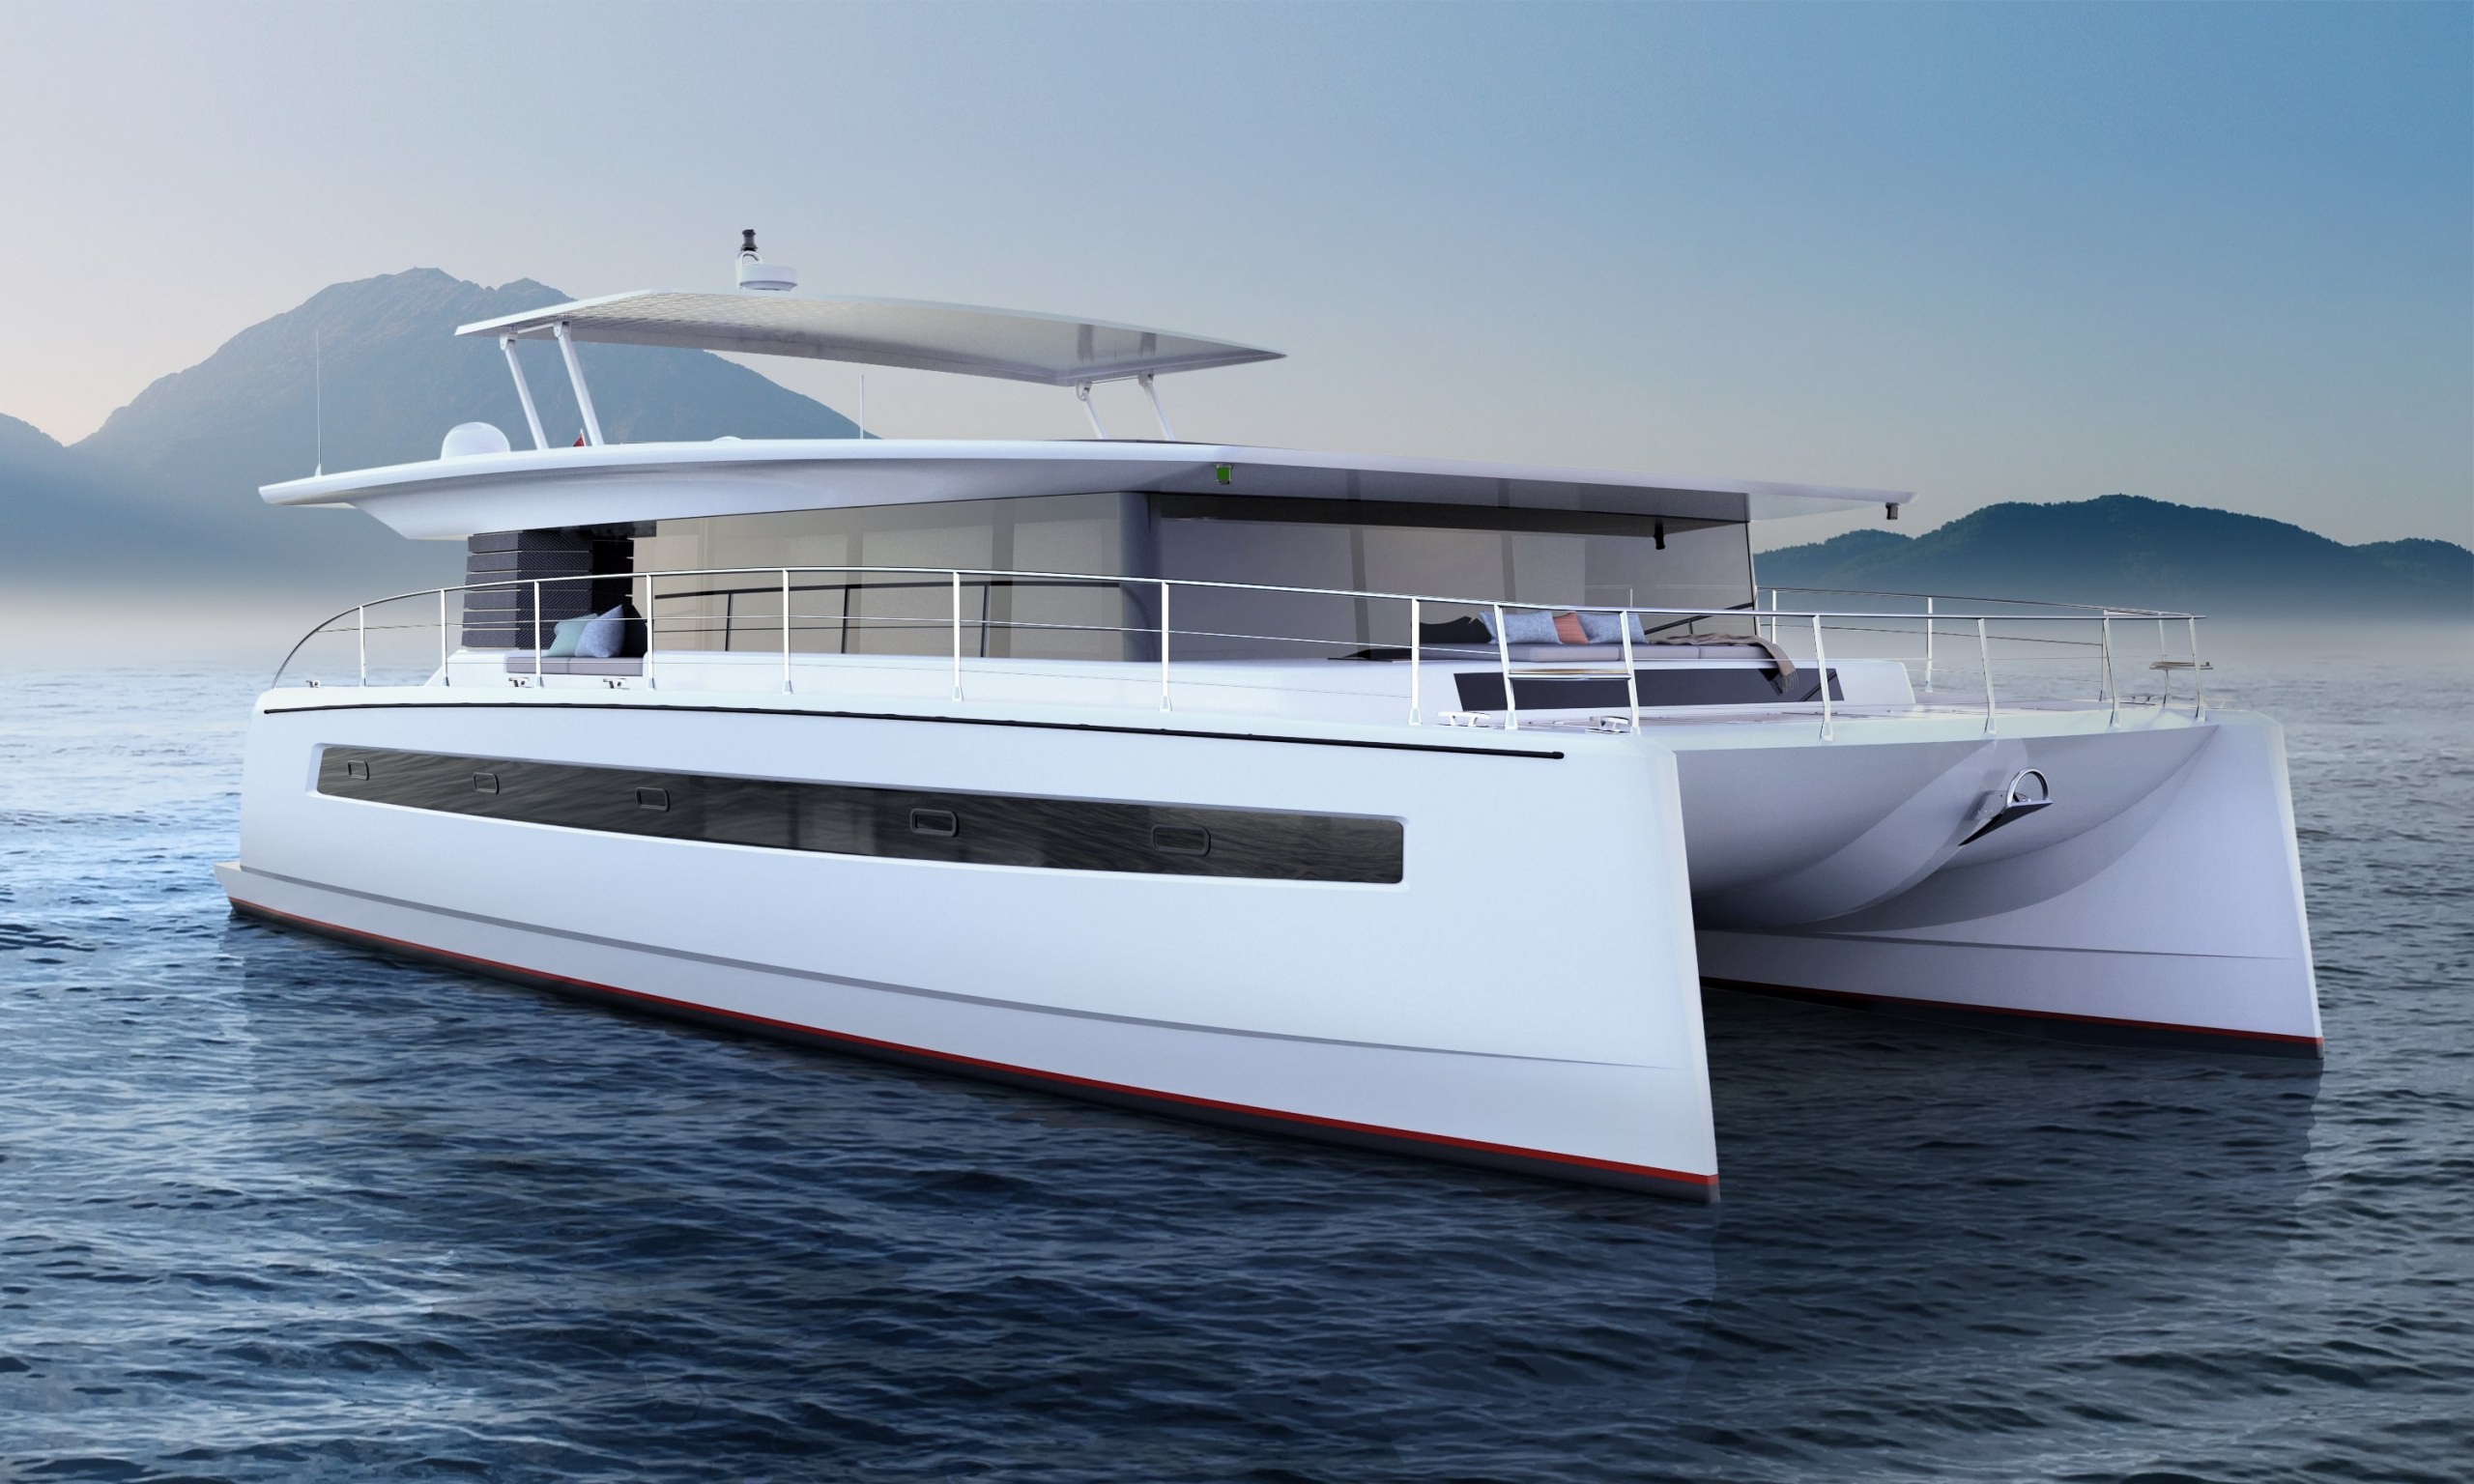 ElectricPowered Silent 60 Catamaran Packs 42 Solar Panels and a Giant